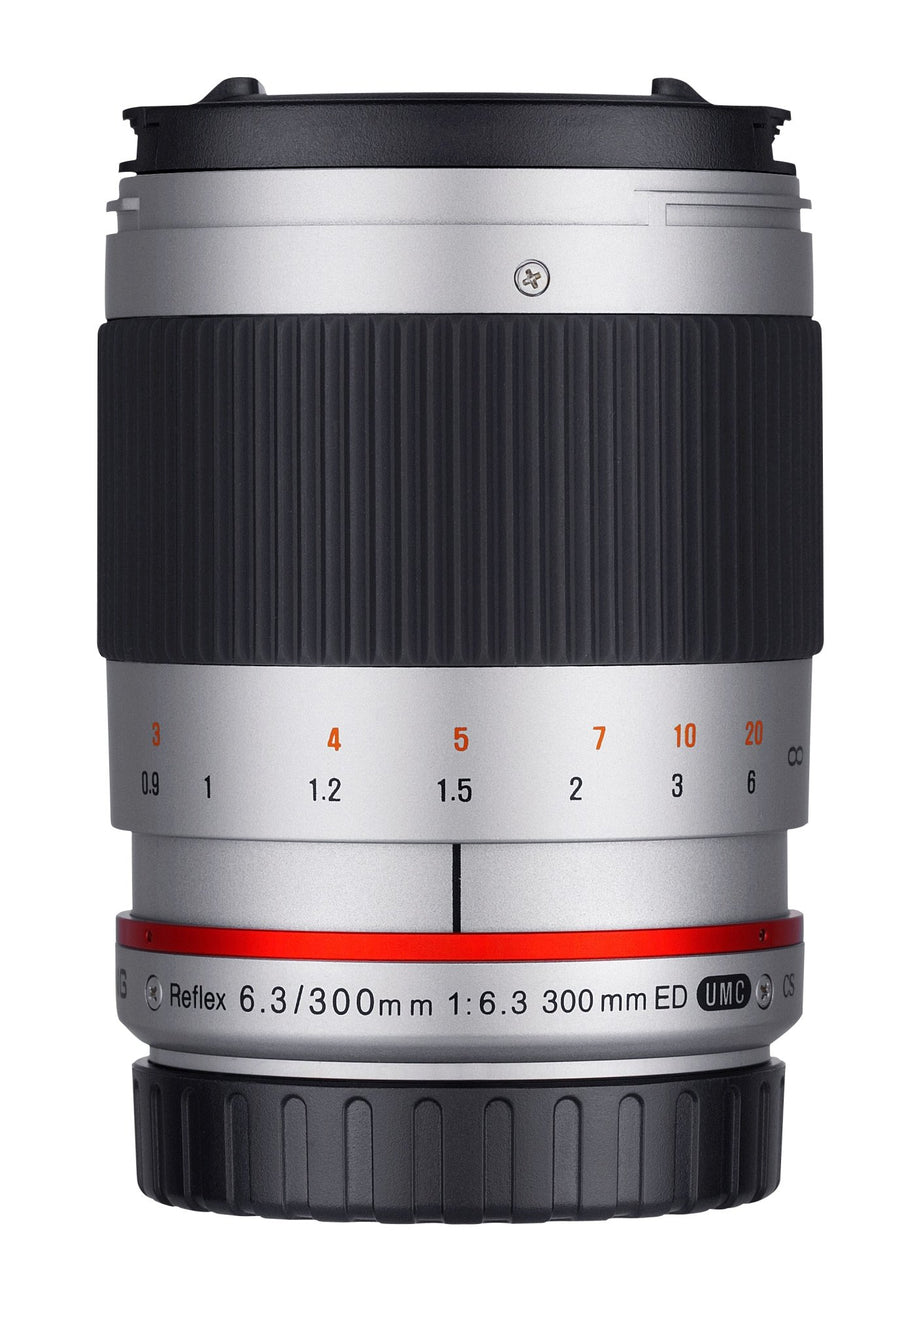 300mm F6.3 Catadioptric Compact Telephoto for Mirrorless Cameras - Rokinon